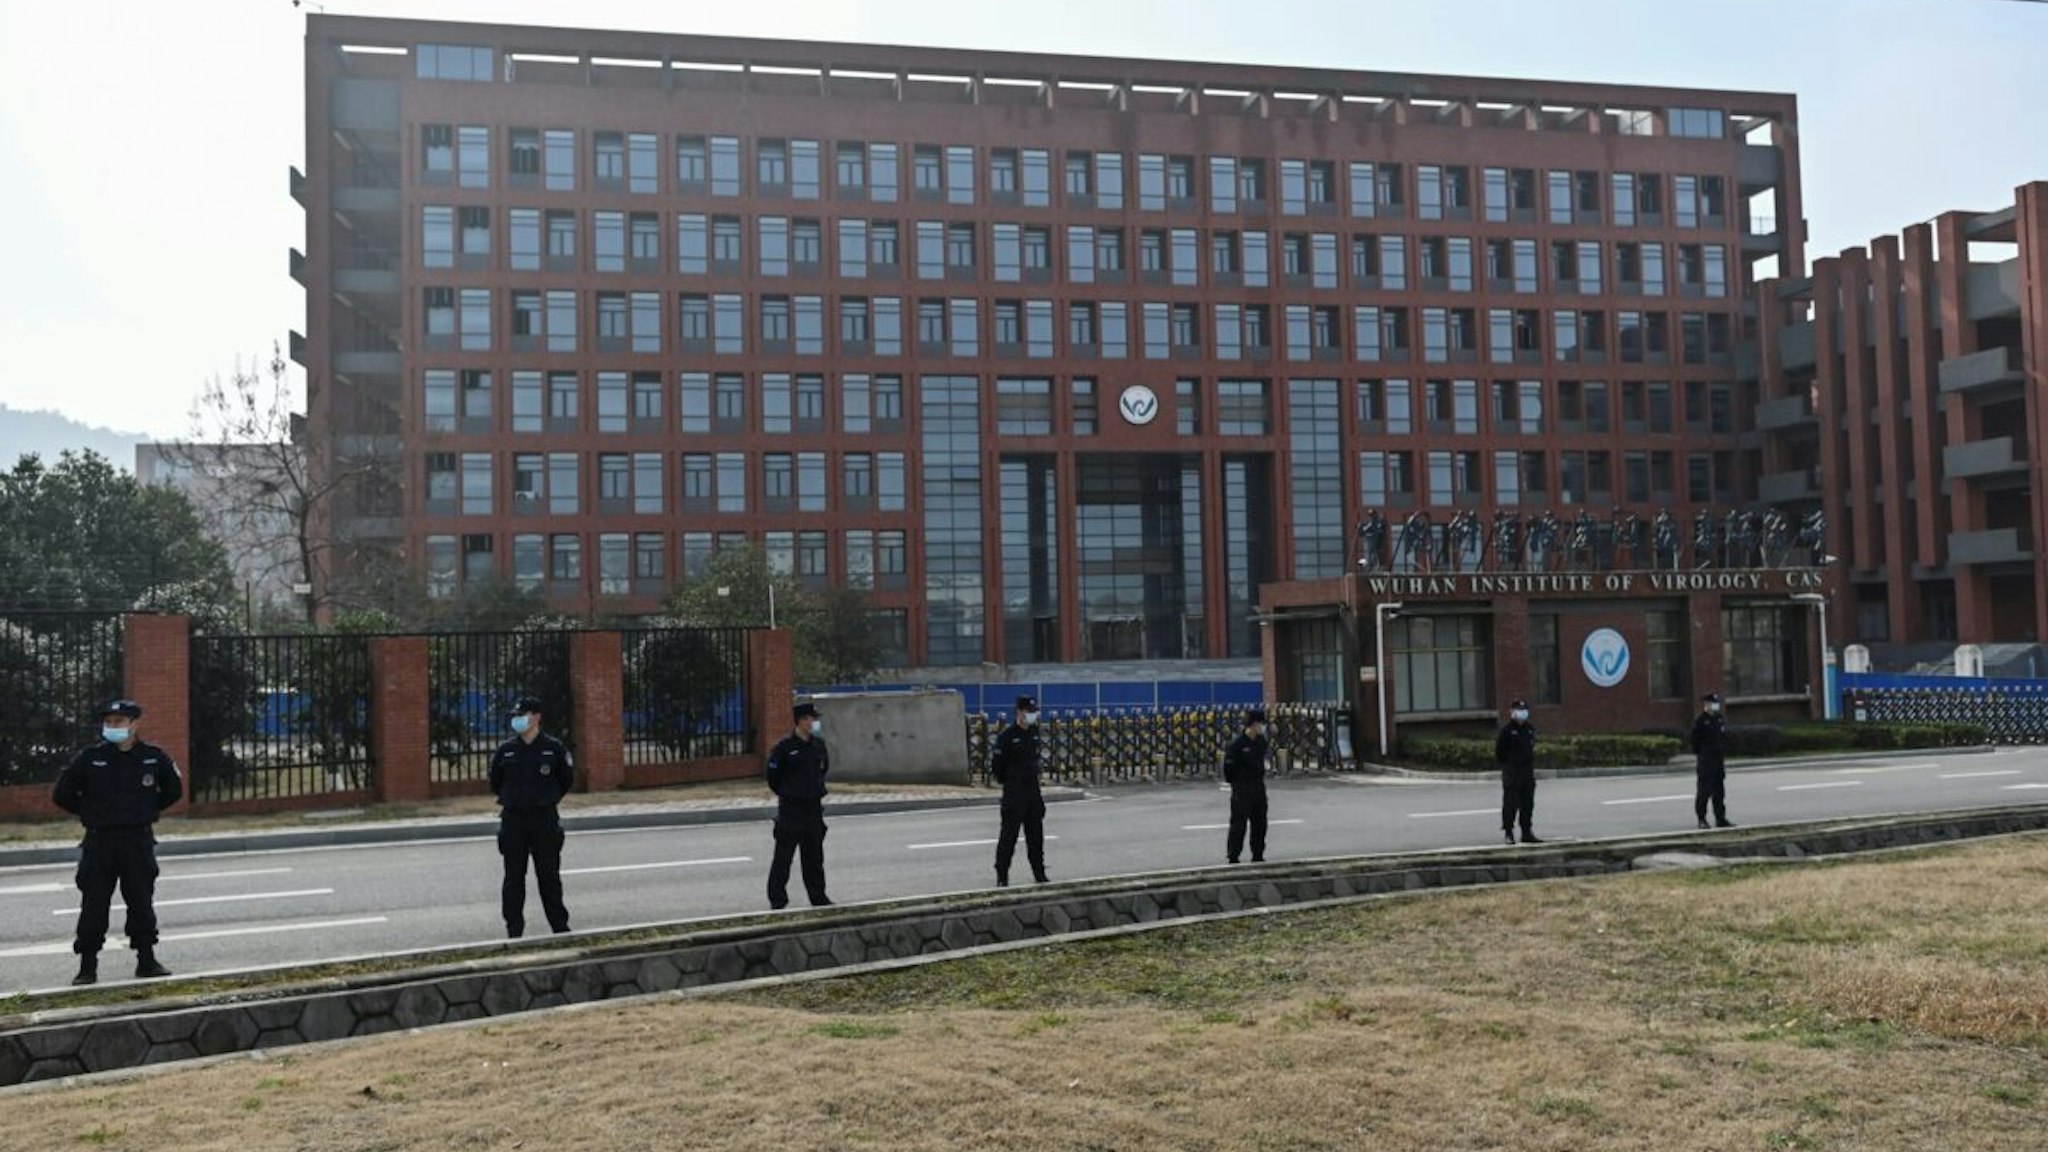 This general view shows the Wuhan Institute of Virology in Wuhan, in China's central Hubei province on February 3, 2021, as members of the World Health Organization (WHO) team investigating the origins of the COVID-19 coronavirus, visit